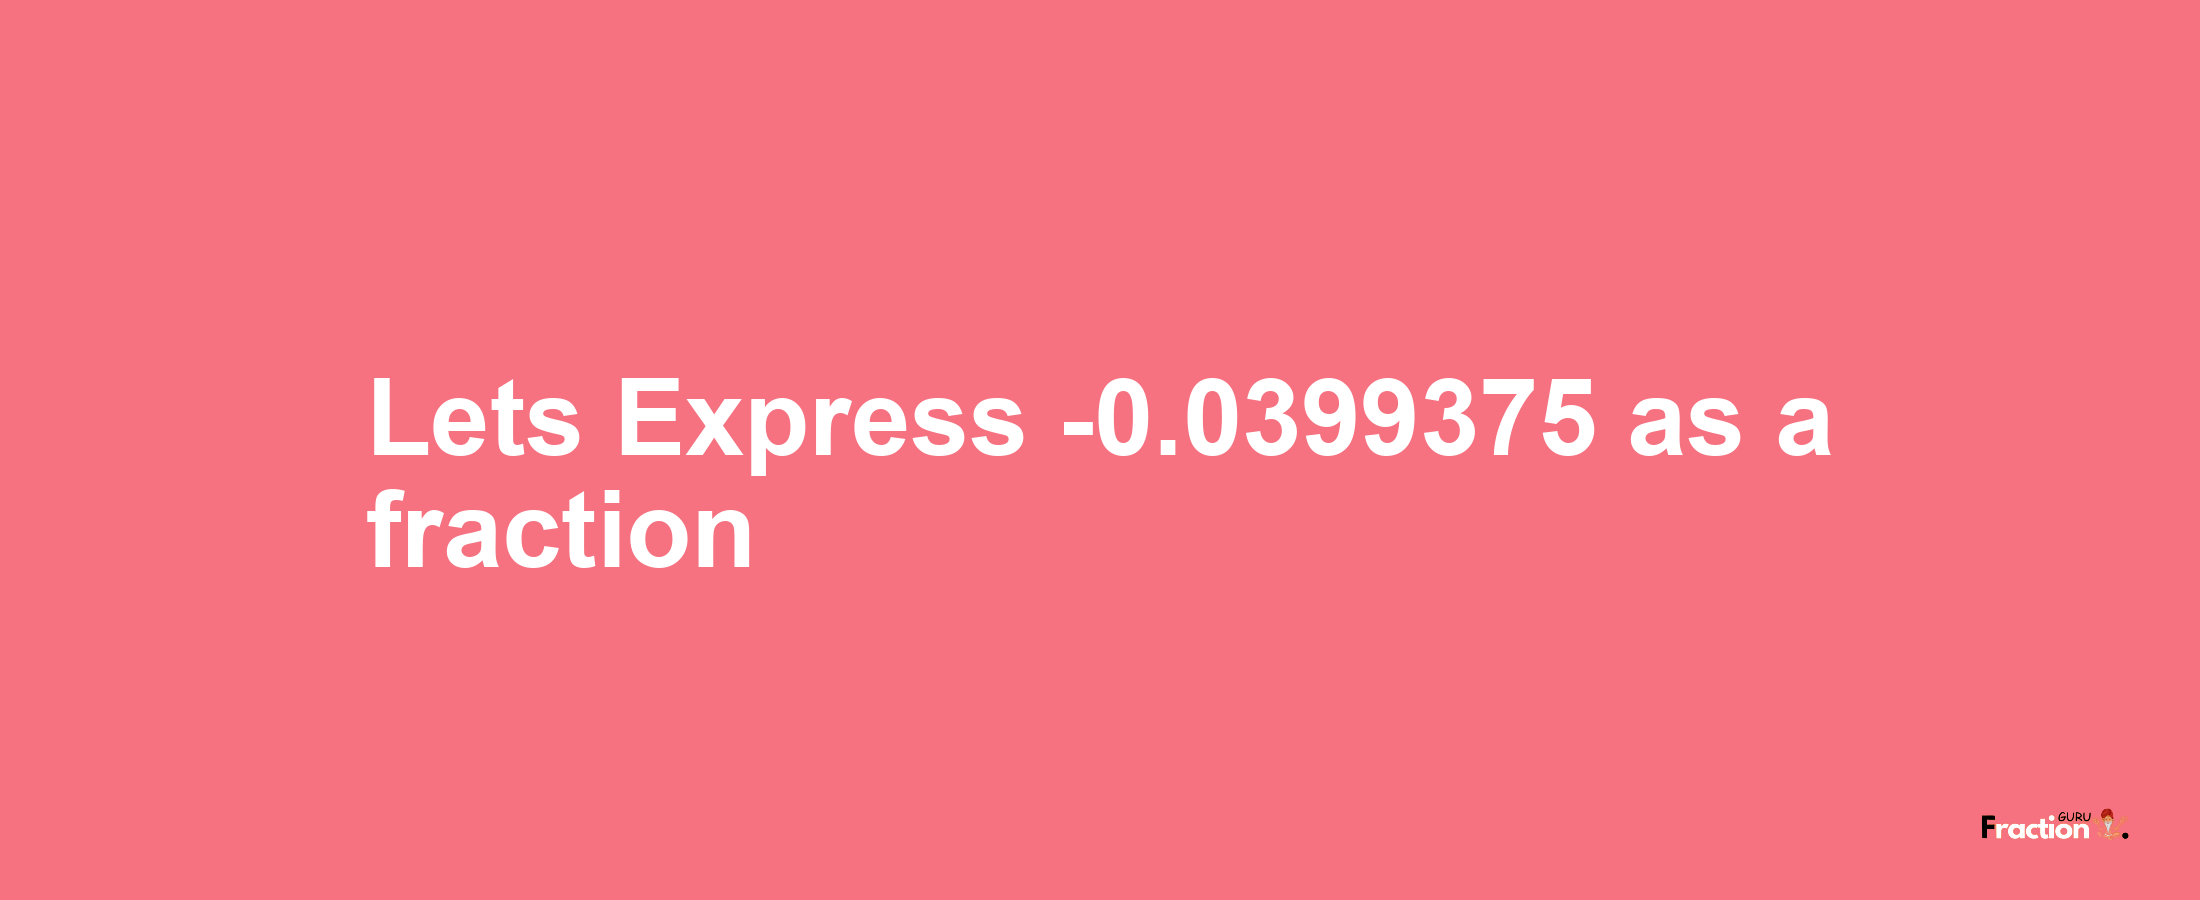 Lets Express -0.0399375 as afraction